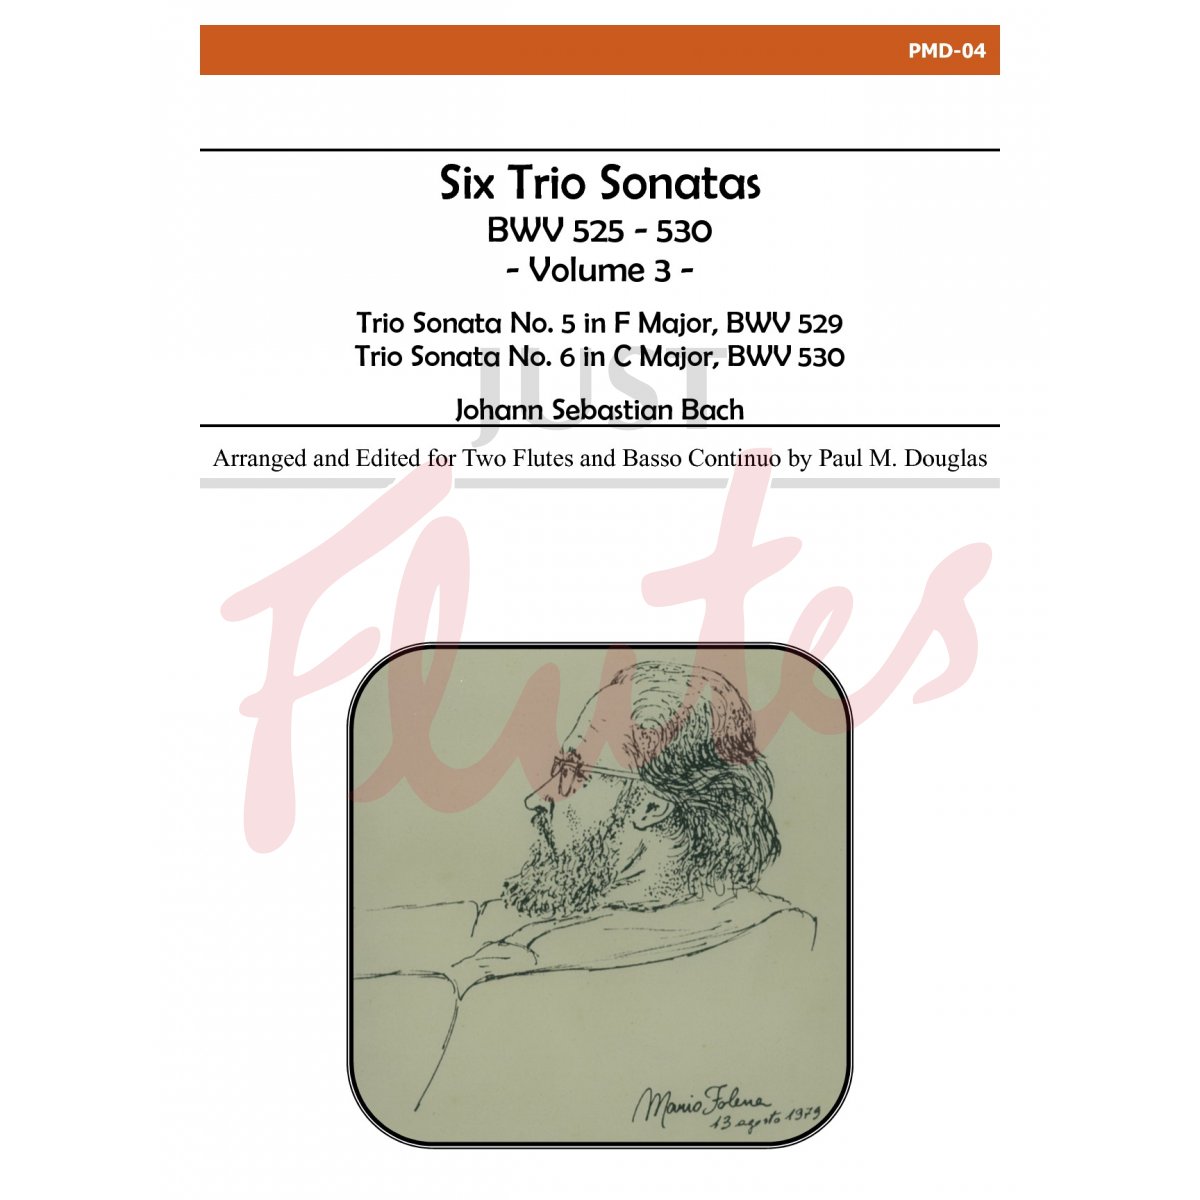 Six Trio Sonatas for Two Flutes and Basso Continuo